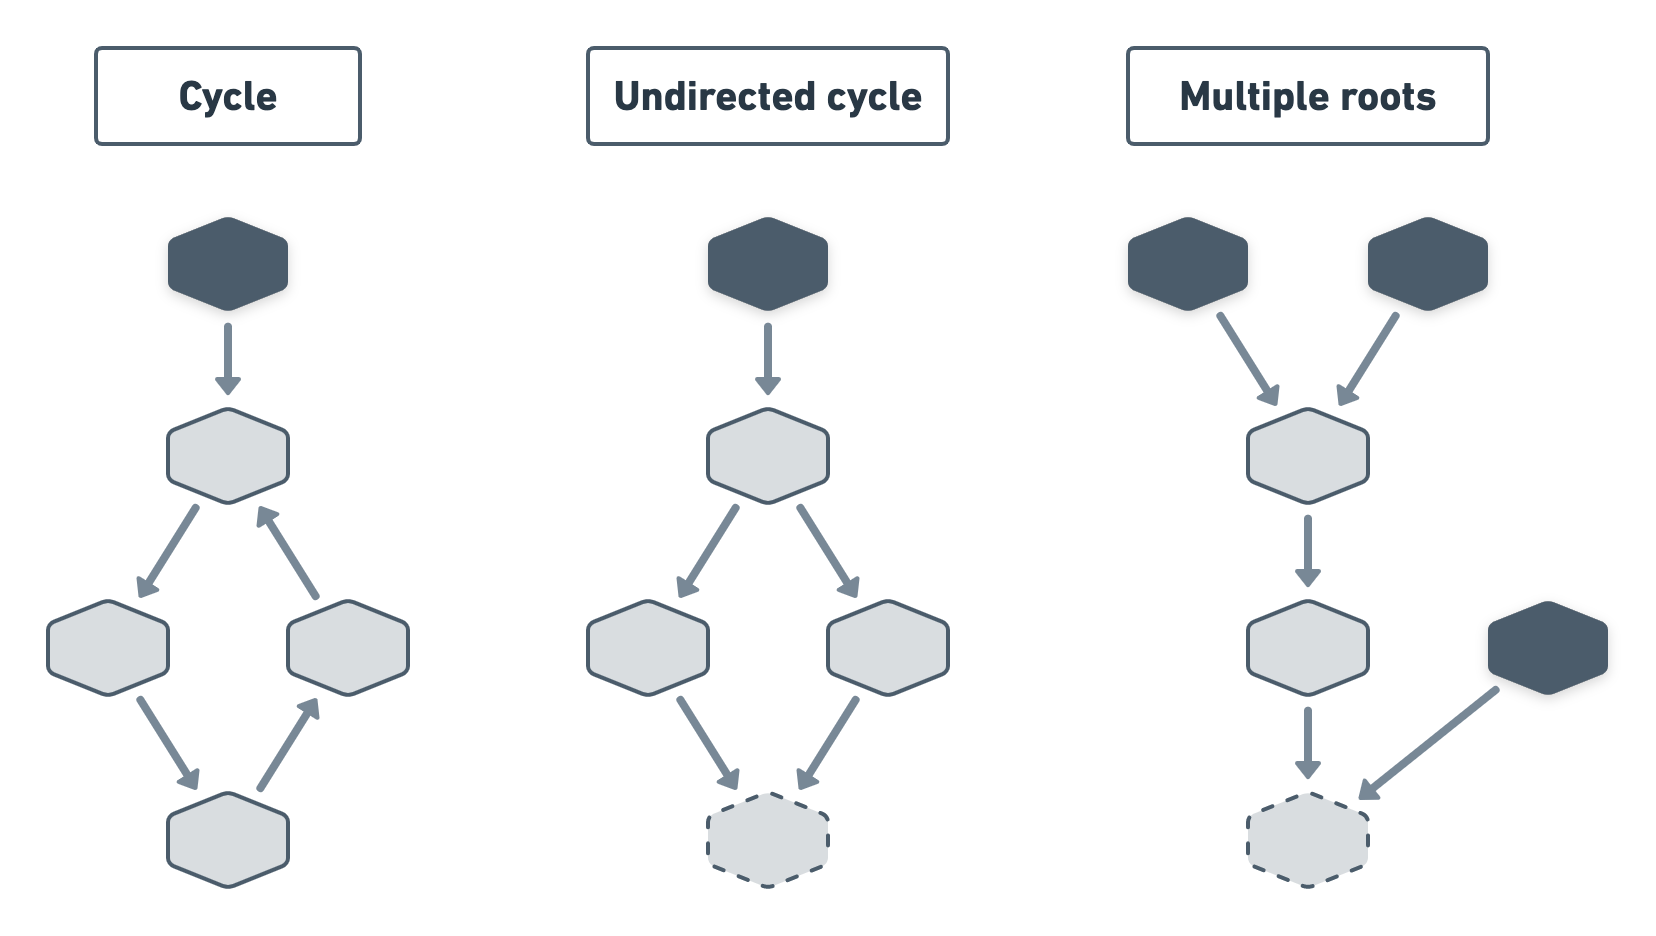 3 diagrams. From left to right: nodes forming a circular dependency; one node having multiple parents in a single-root cluster; a cluster of nodes with multiple roots